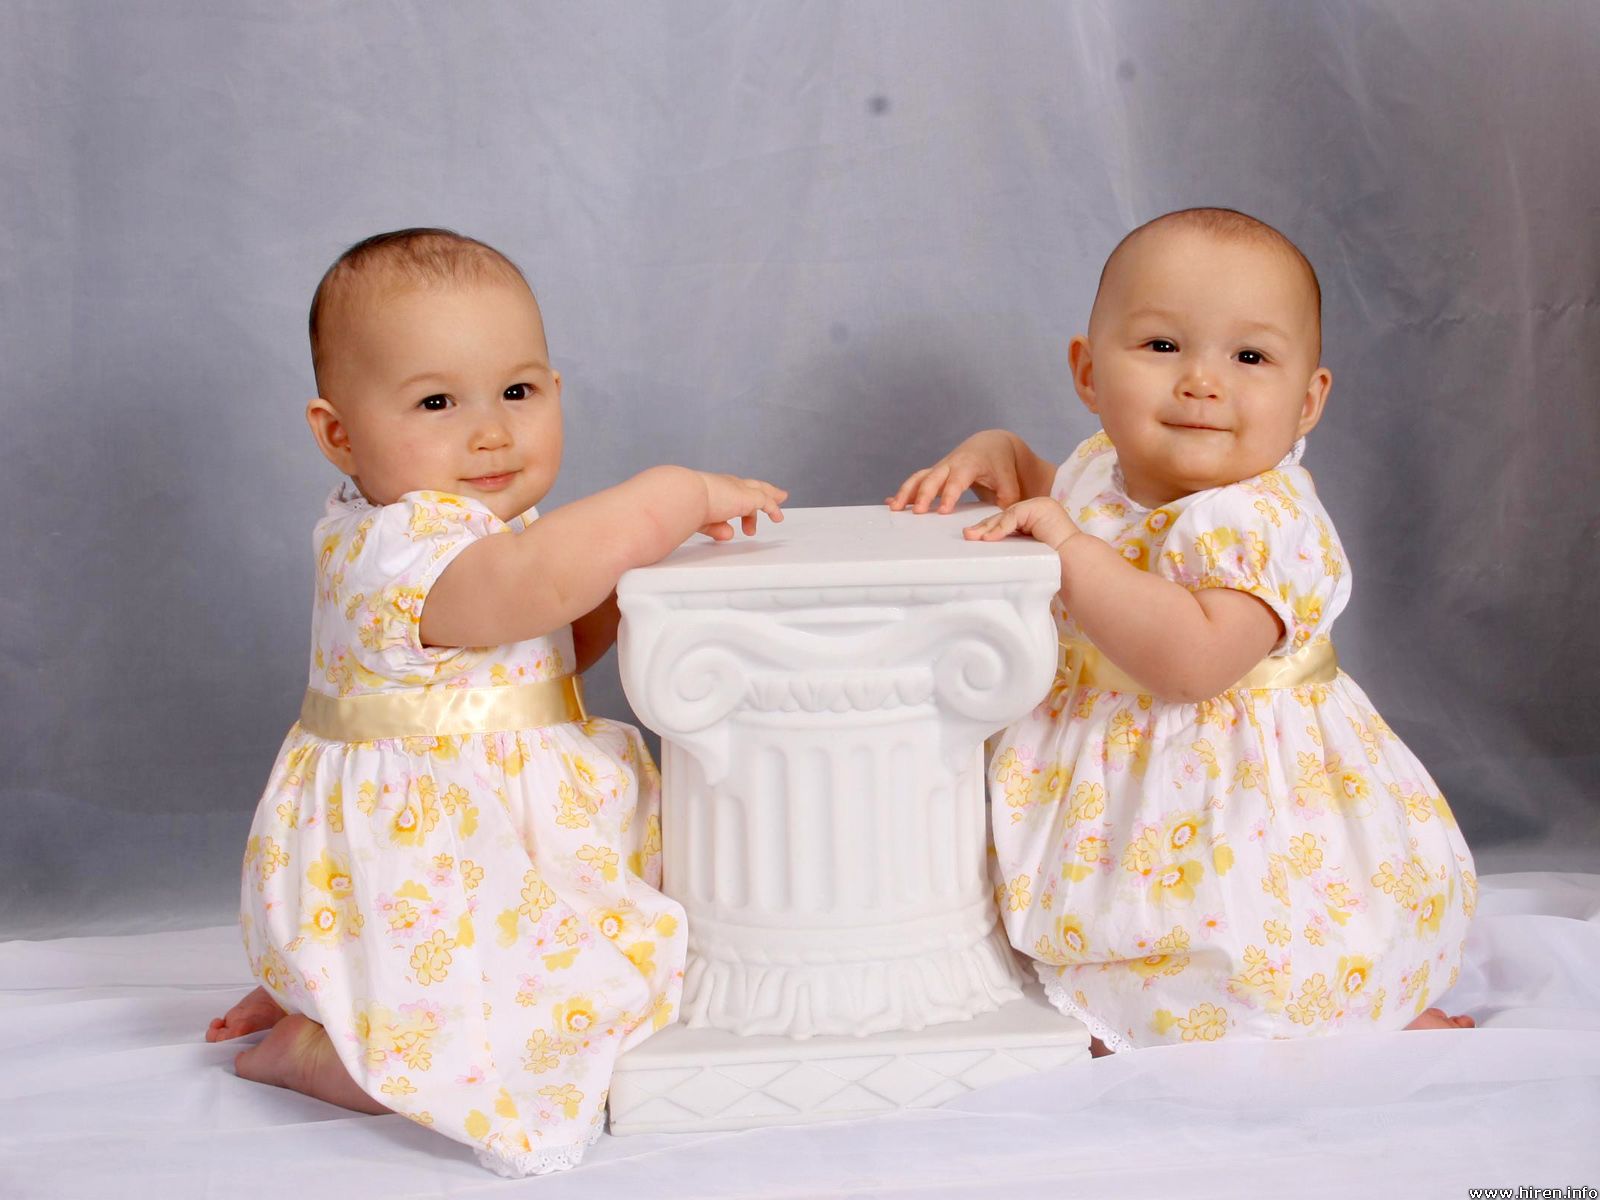 About Baby Article: Twins Baby, Child, and Pictures (Types)